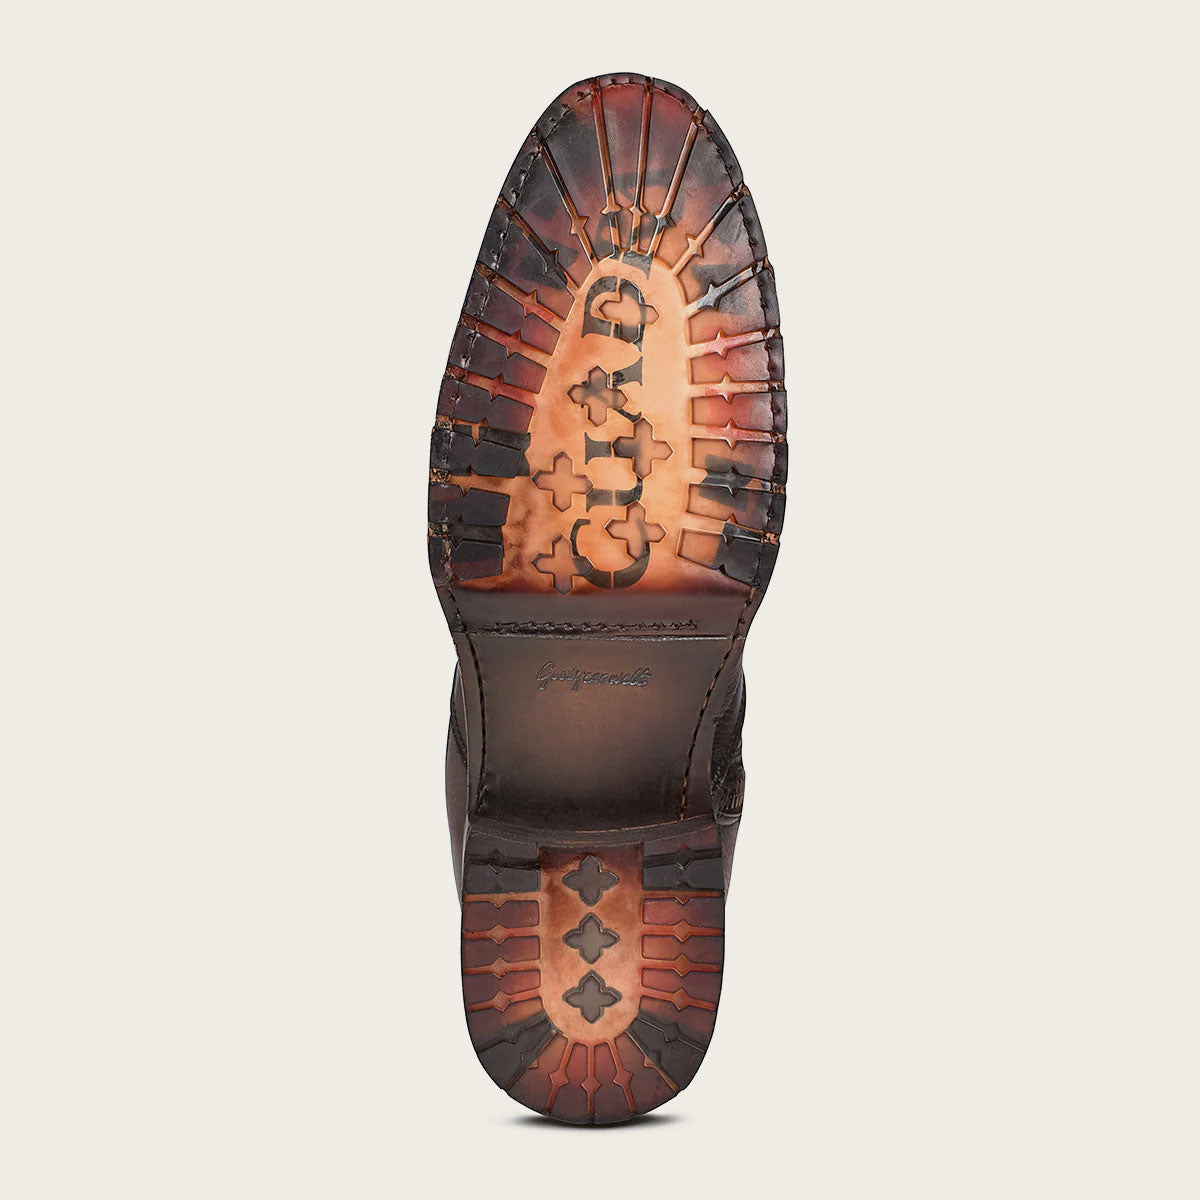 Hand-painted honey leather men's boot with engraved logo and perforated details